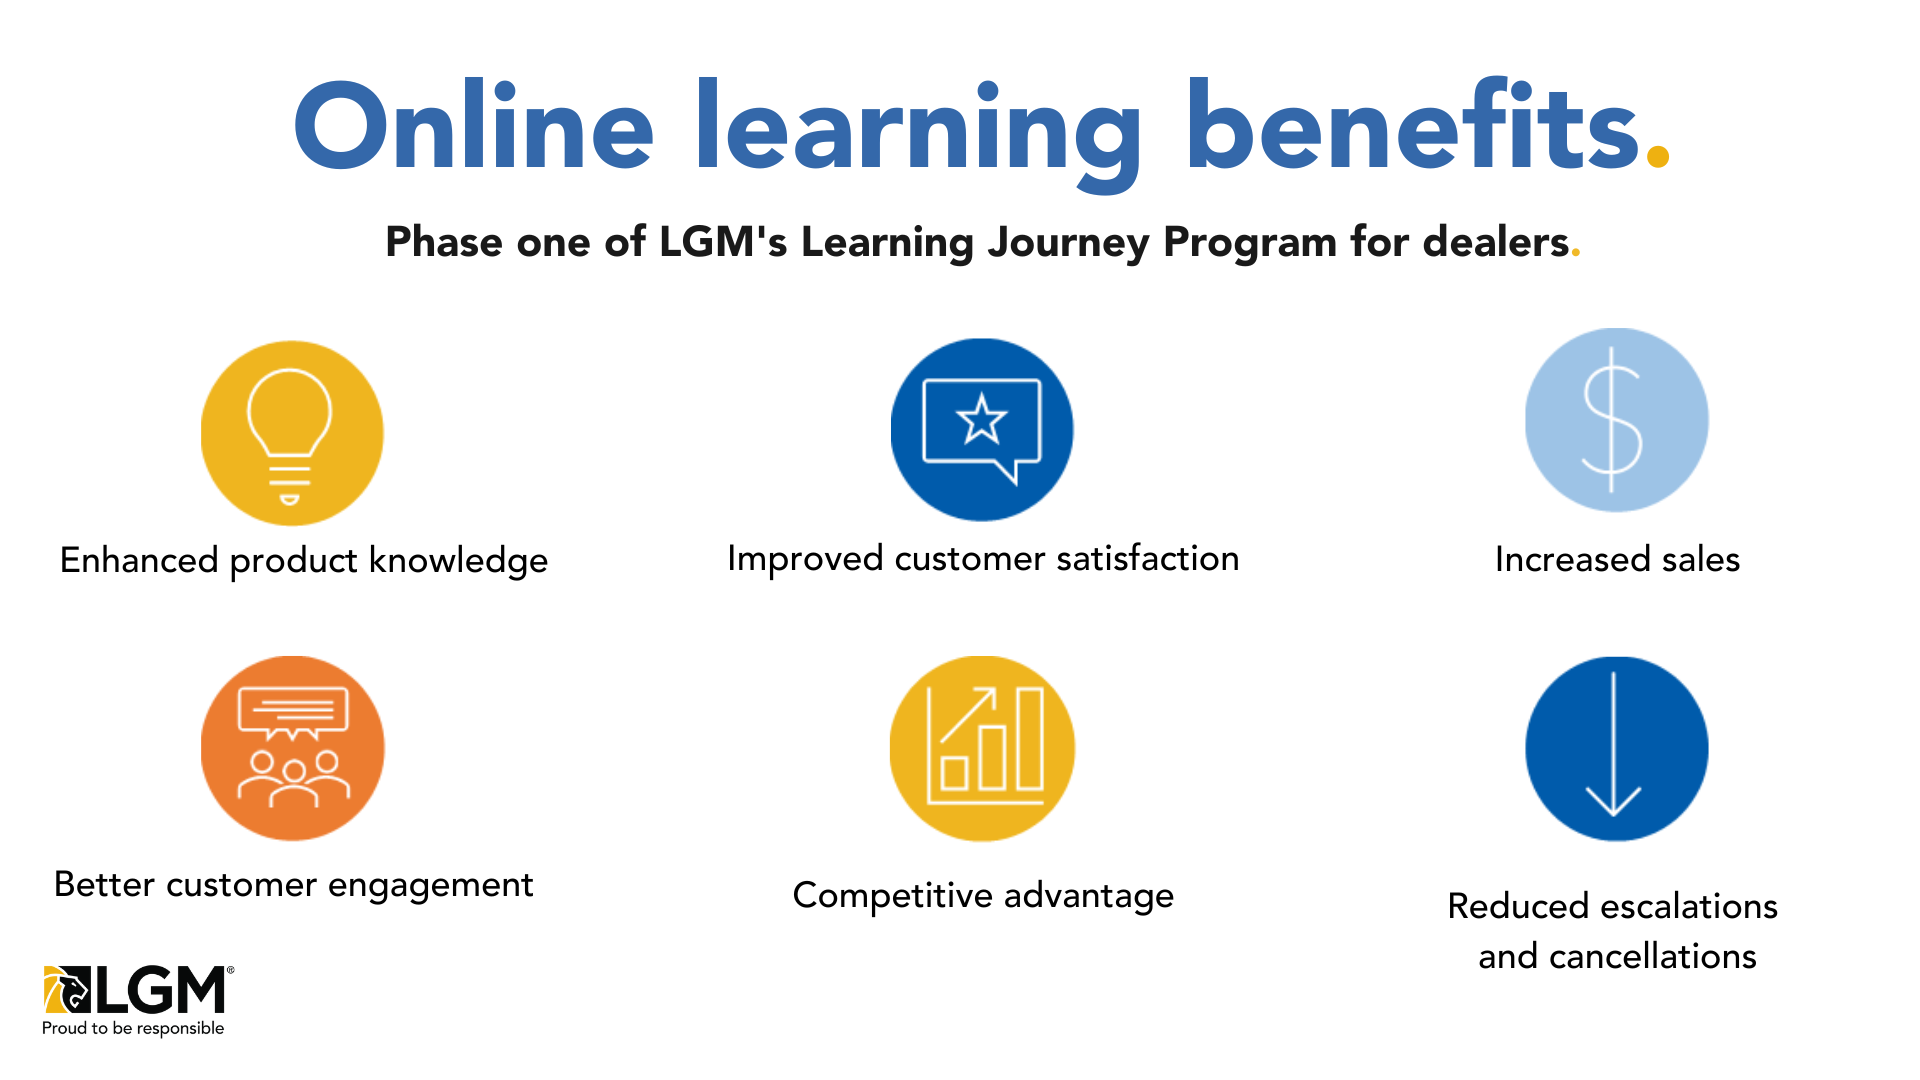 Online learning benefits from phase one of LGM's Learning Journey Program for dealers include: enhanced product knowledge, improved customer satisfaction, increased sales, better customer engagement, competitive advantage, and reduced escalations and cancellations.